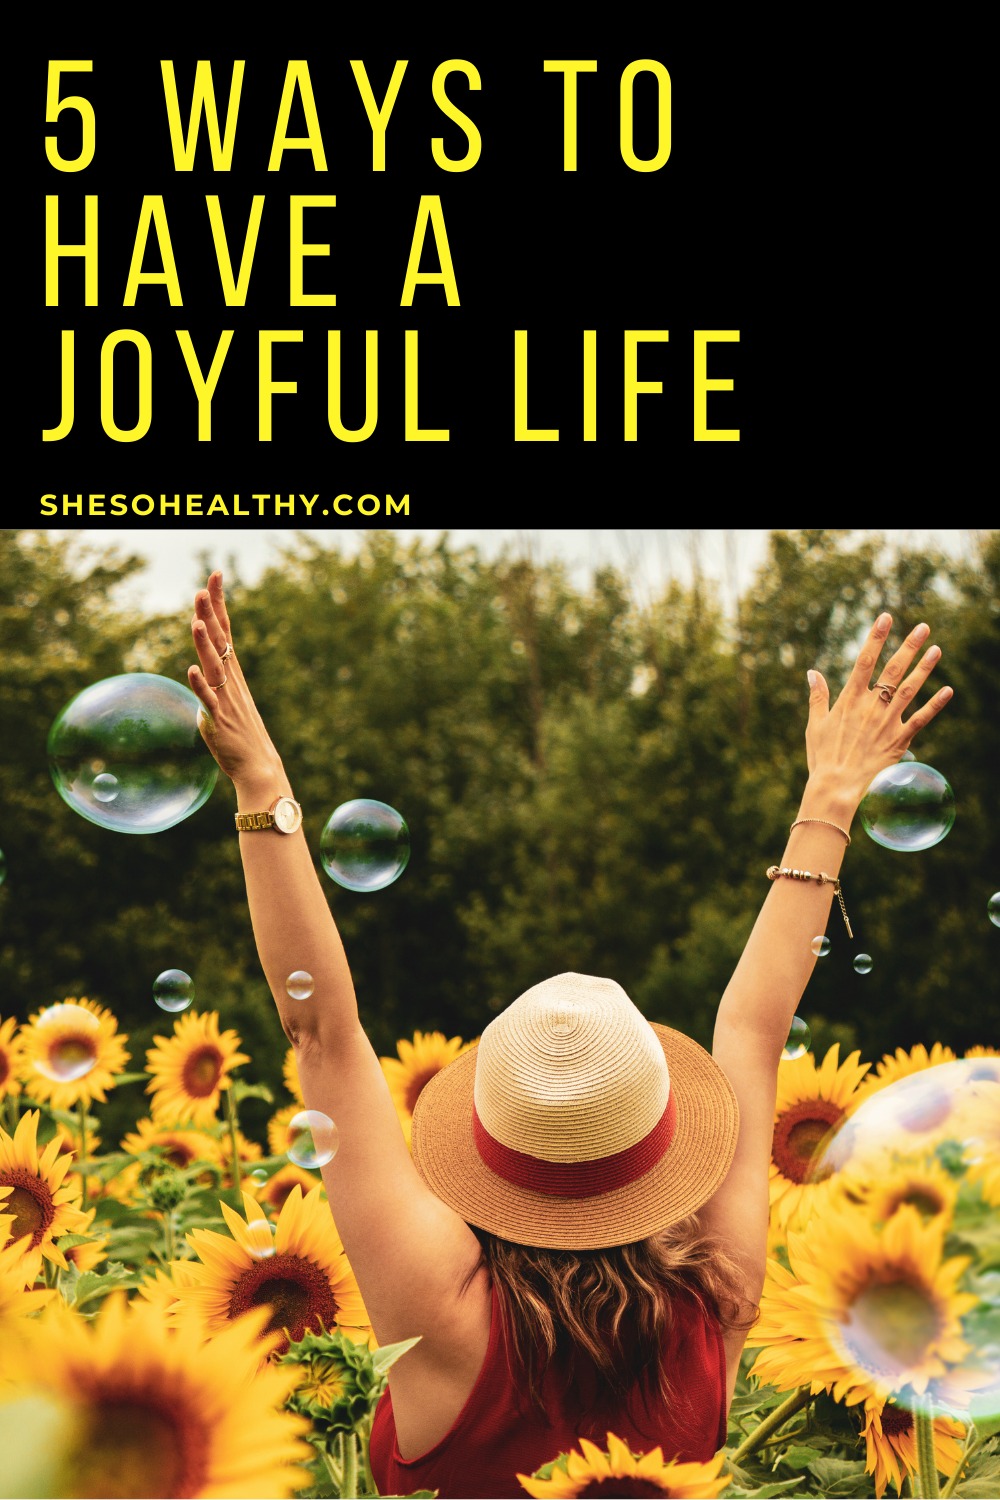 personal essay on what brings you joy